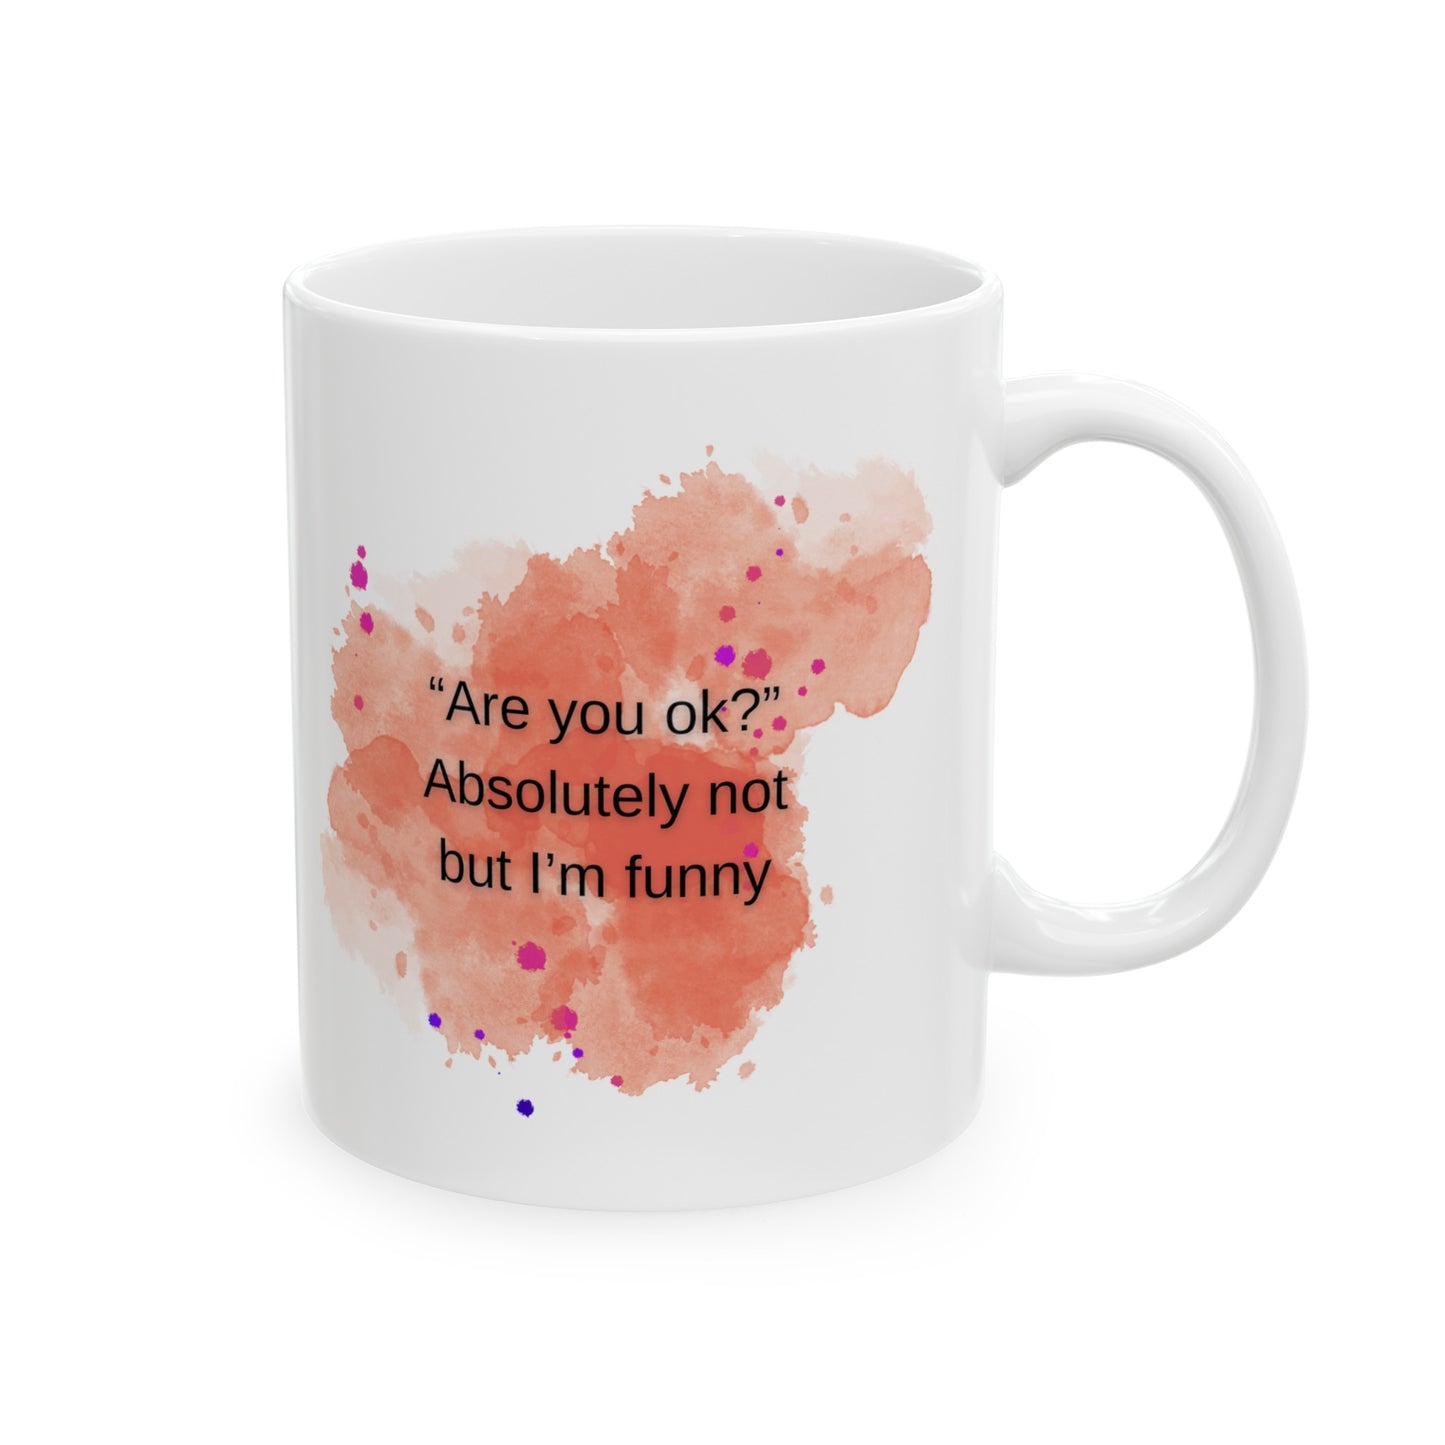 Are you ok? Absolutely not Ceramic Mug, meme mug, Funny sayings,funny quotes,Silly sayings, witty gifts, Mom nana daughter gifts, dark humor